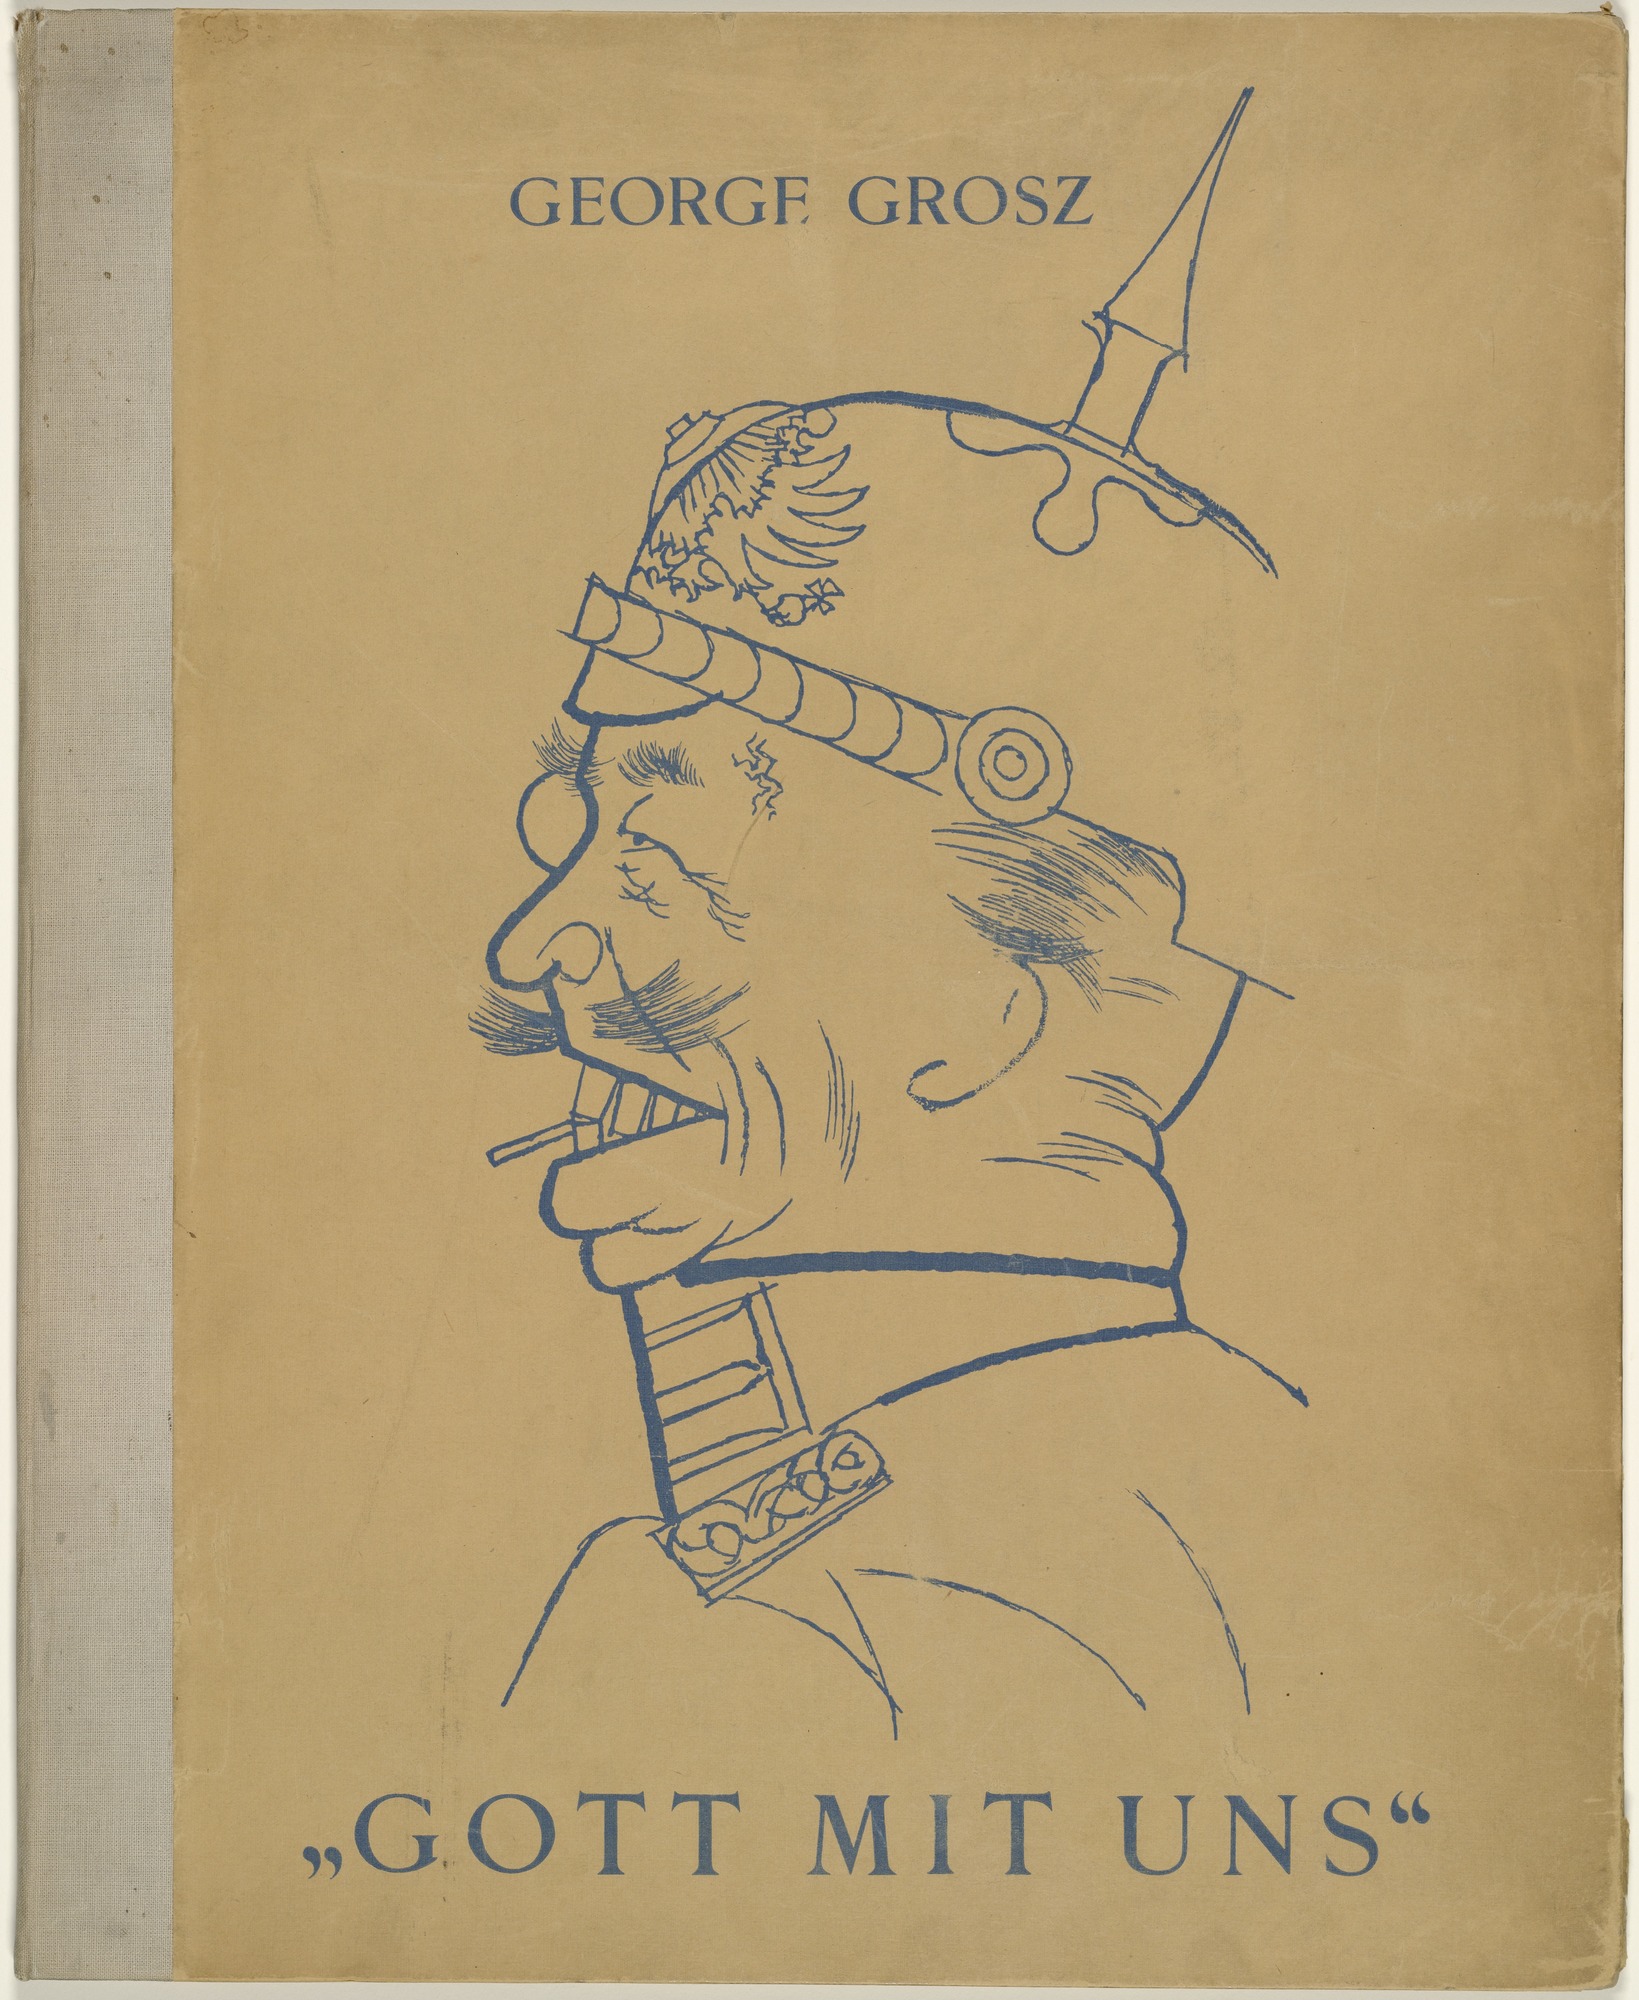 George Grosz, Cover, Gott mit uns (God with us), 1919, letterpress and line block, 49.2 x 40 cm (MoMA)